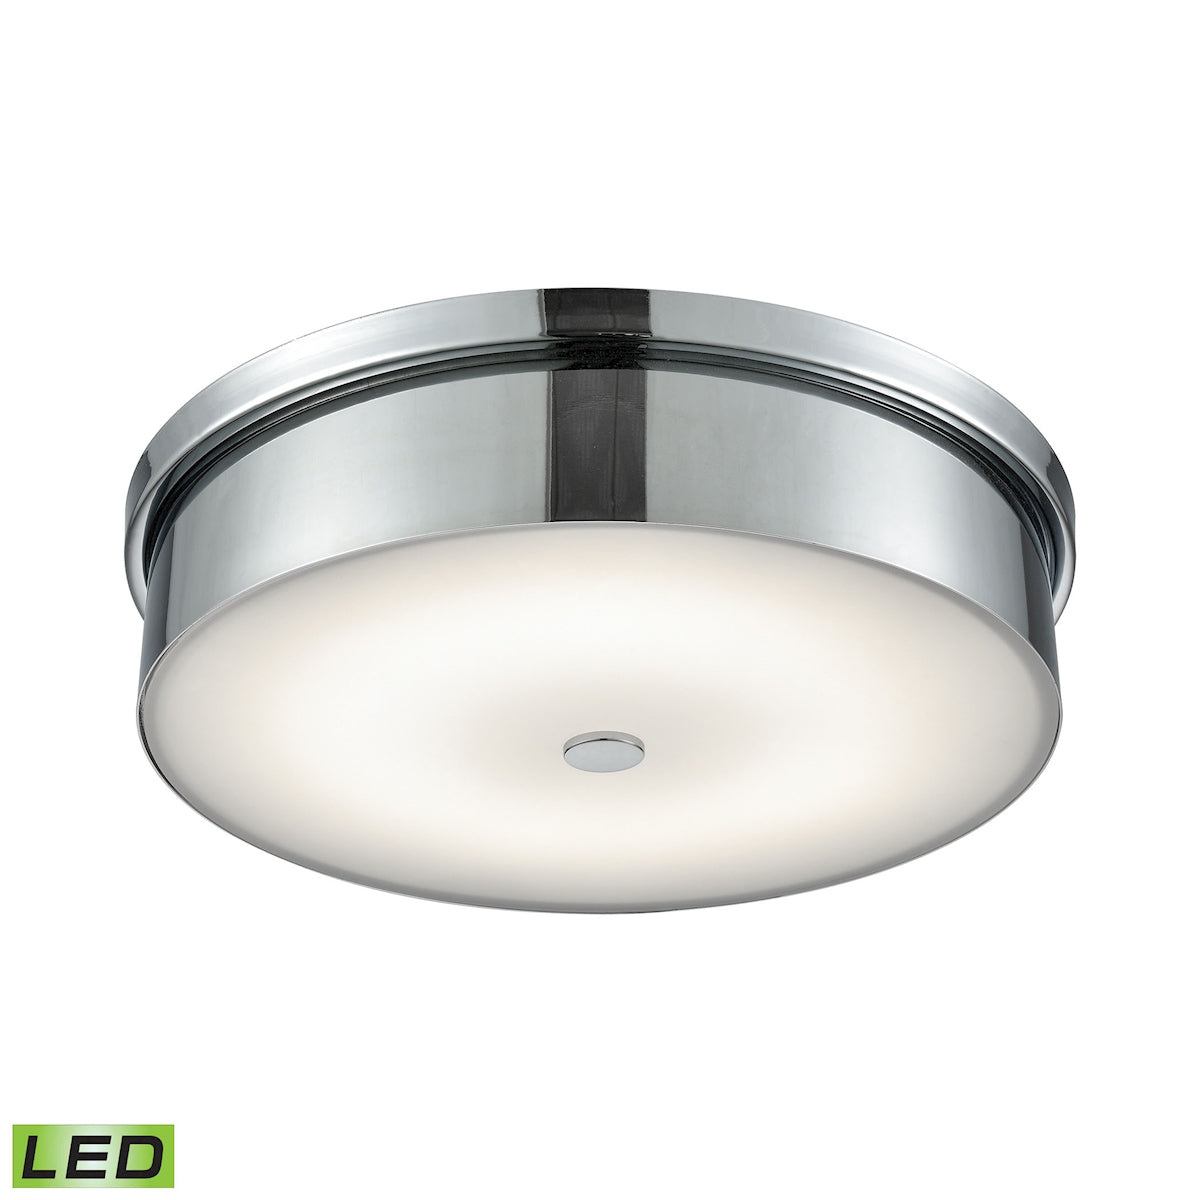 ELK Lighting FML4950-10-15 Towne 1-Light Round Flush Mount in Chrome with Opal Glass Diffuser - Integrated LED - Large